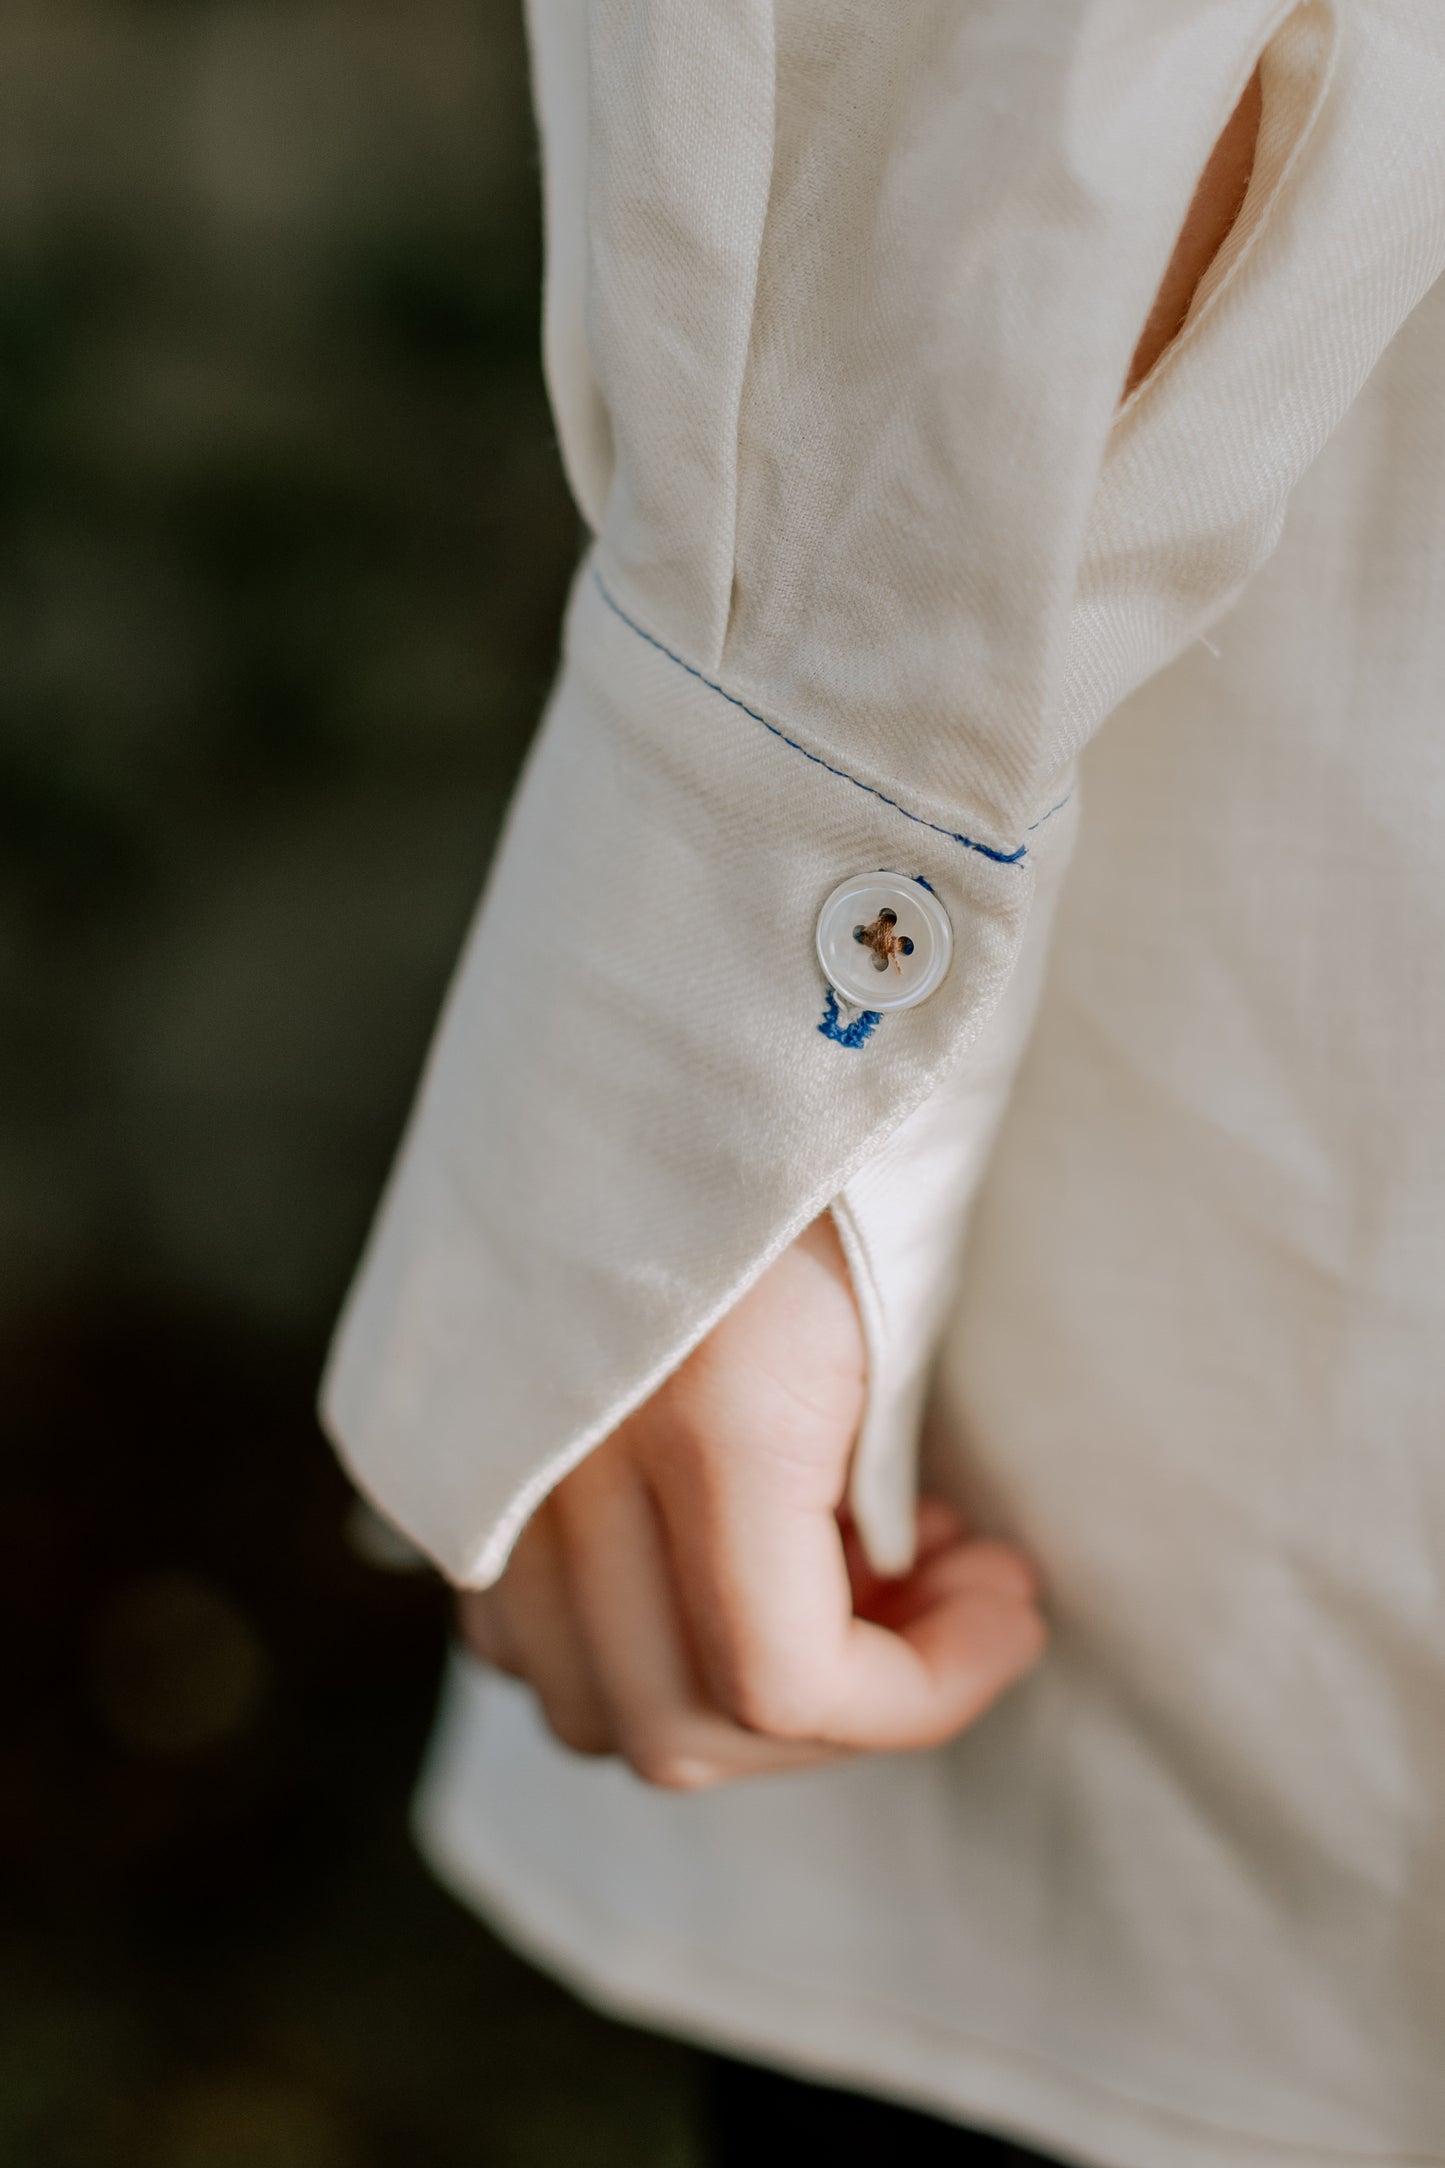 DAD SHIRT | ECRU TWILL | The Dad shirt- inspried by one of Amy's favourite oversized shirts, poached from her Dad's wardrobe! The shape of the shirt has been carefully considered - a longer length, oversized pocket, collar and cuff details make this a war